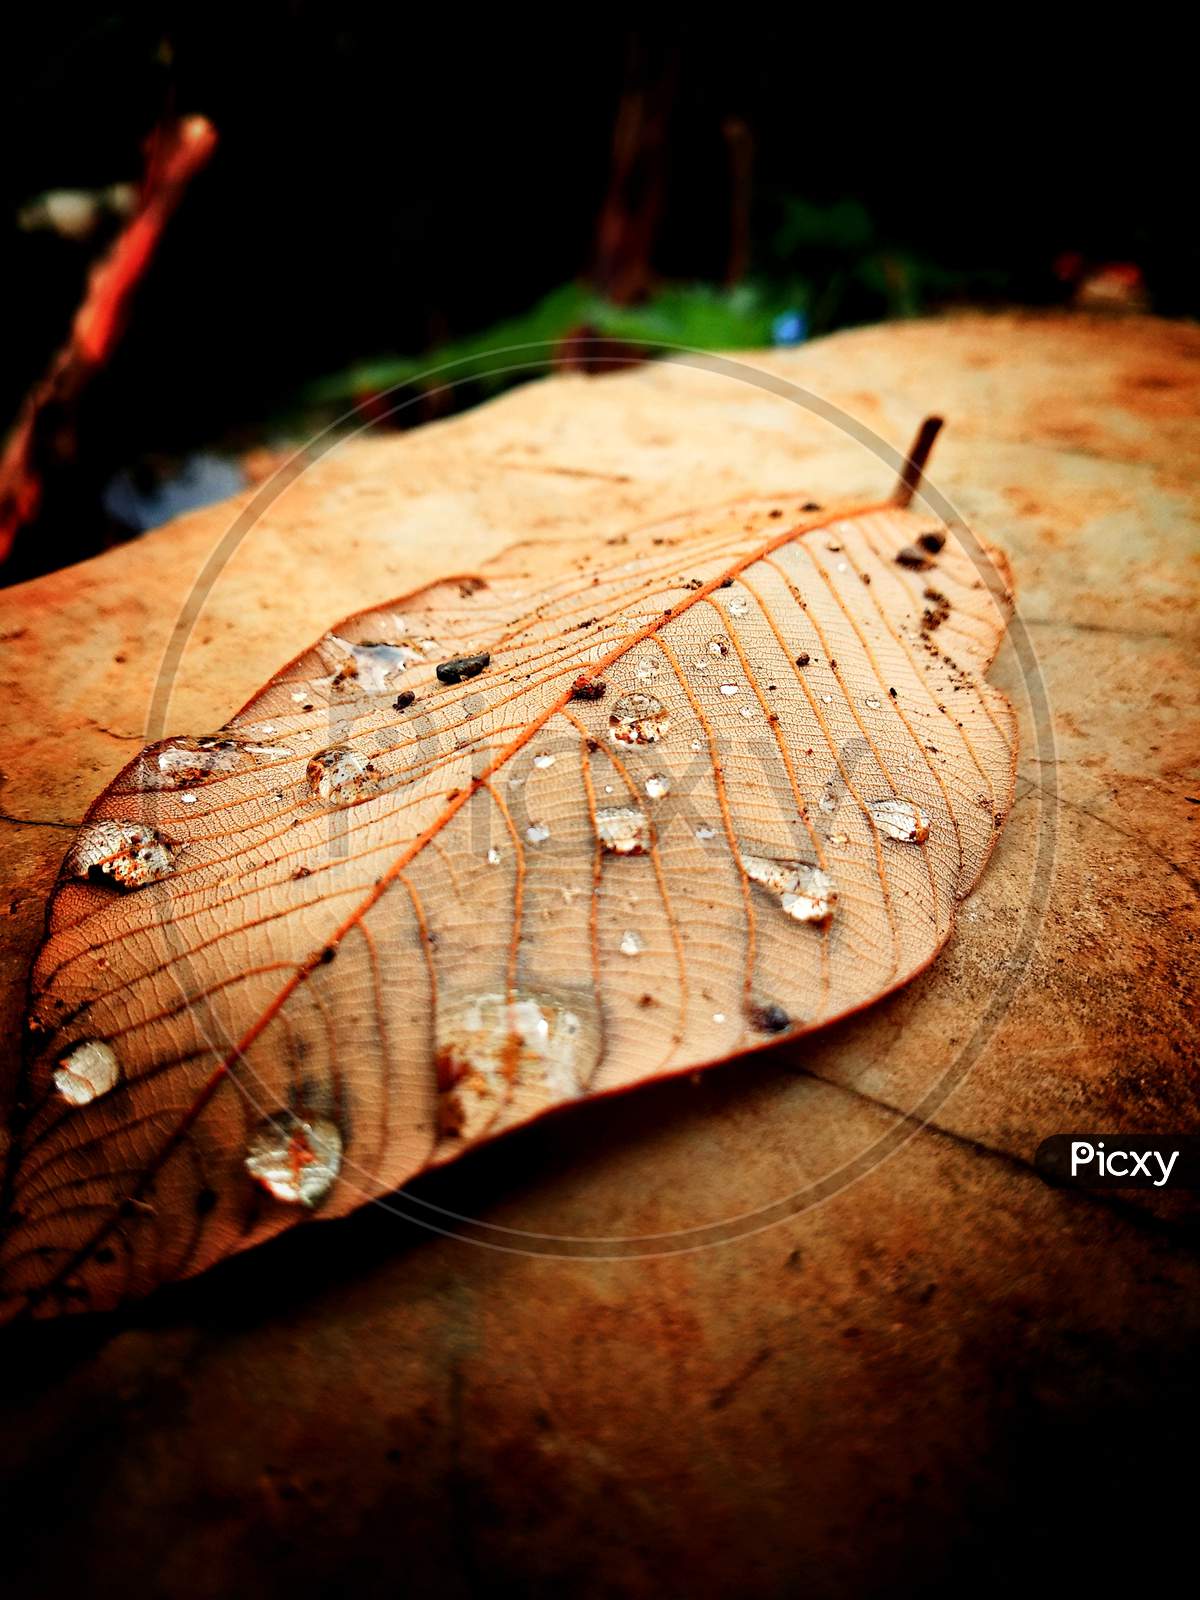 Beautiful water droplets on the leaf